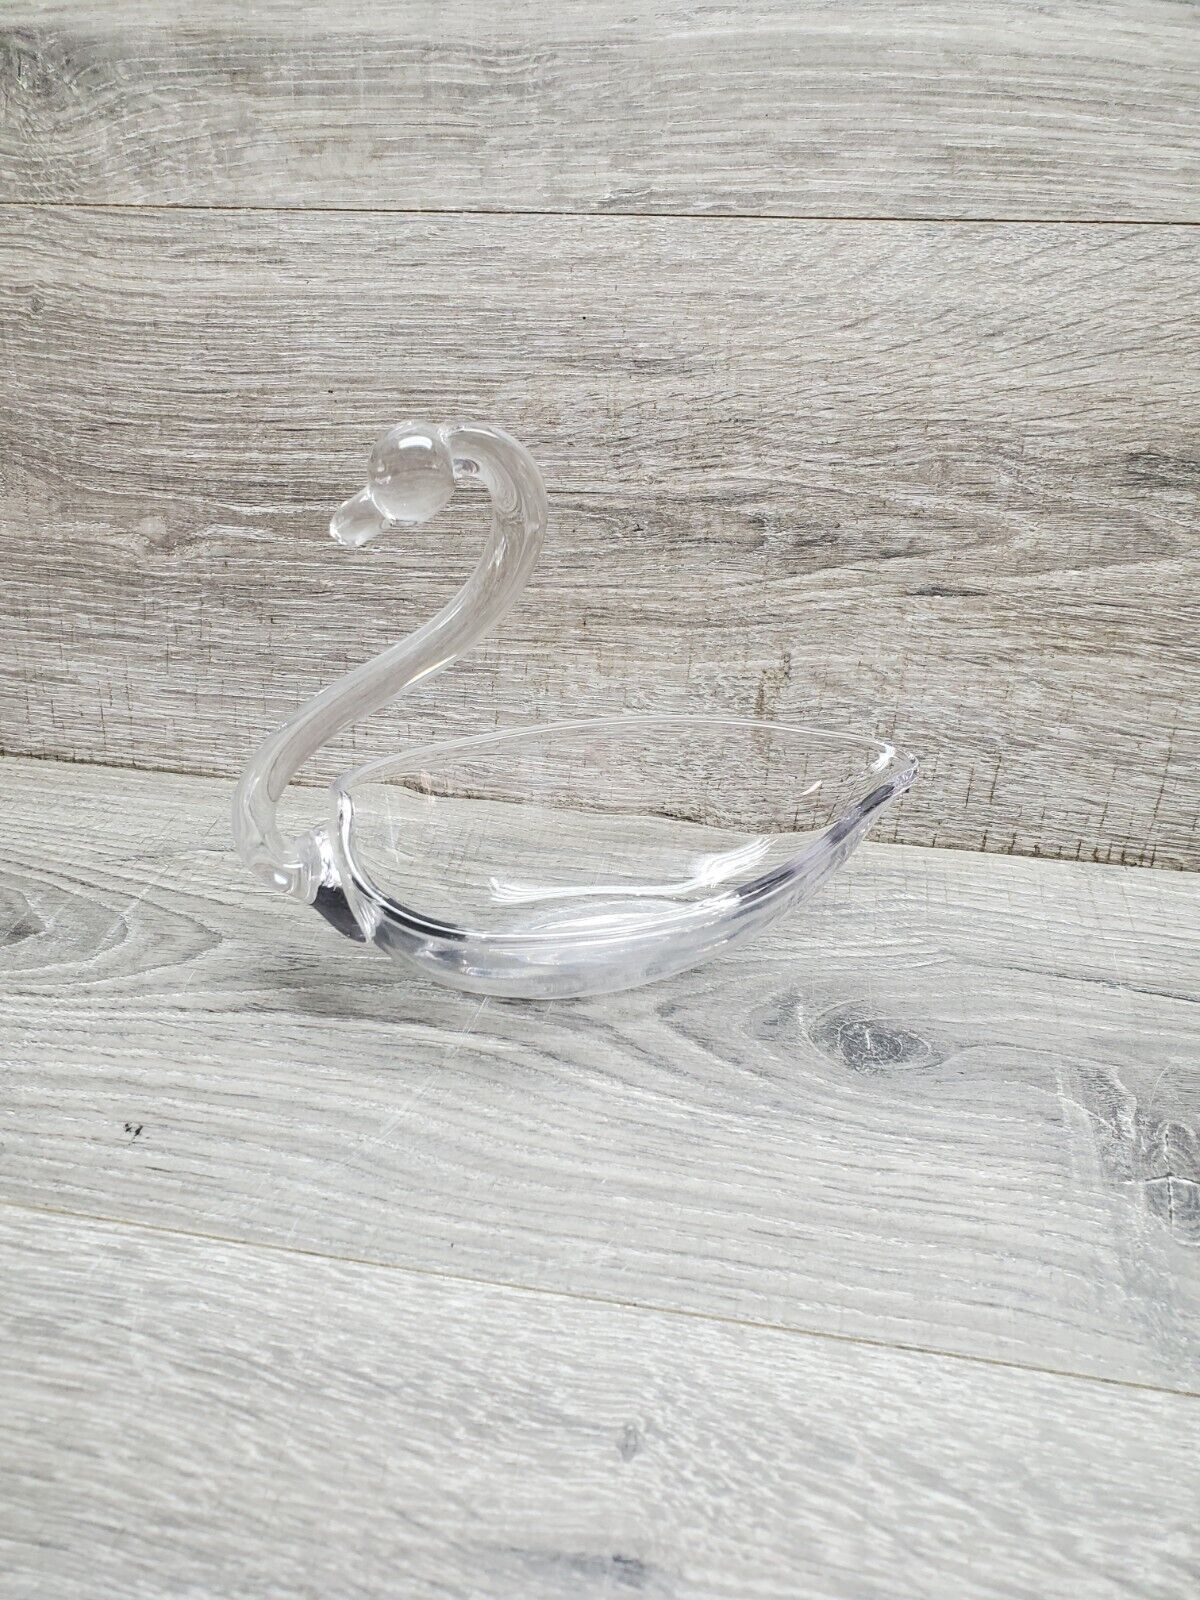 Vintage Clear Glass Swan Long Neck Candy Dish￼